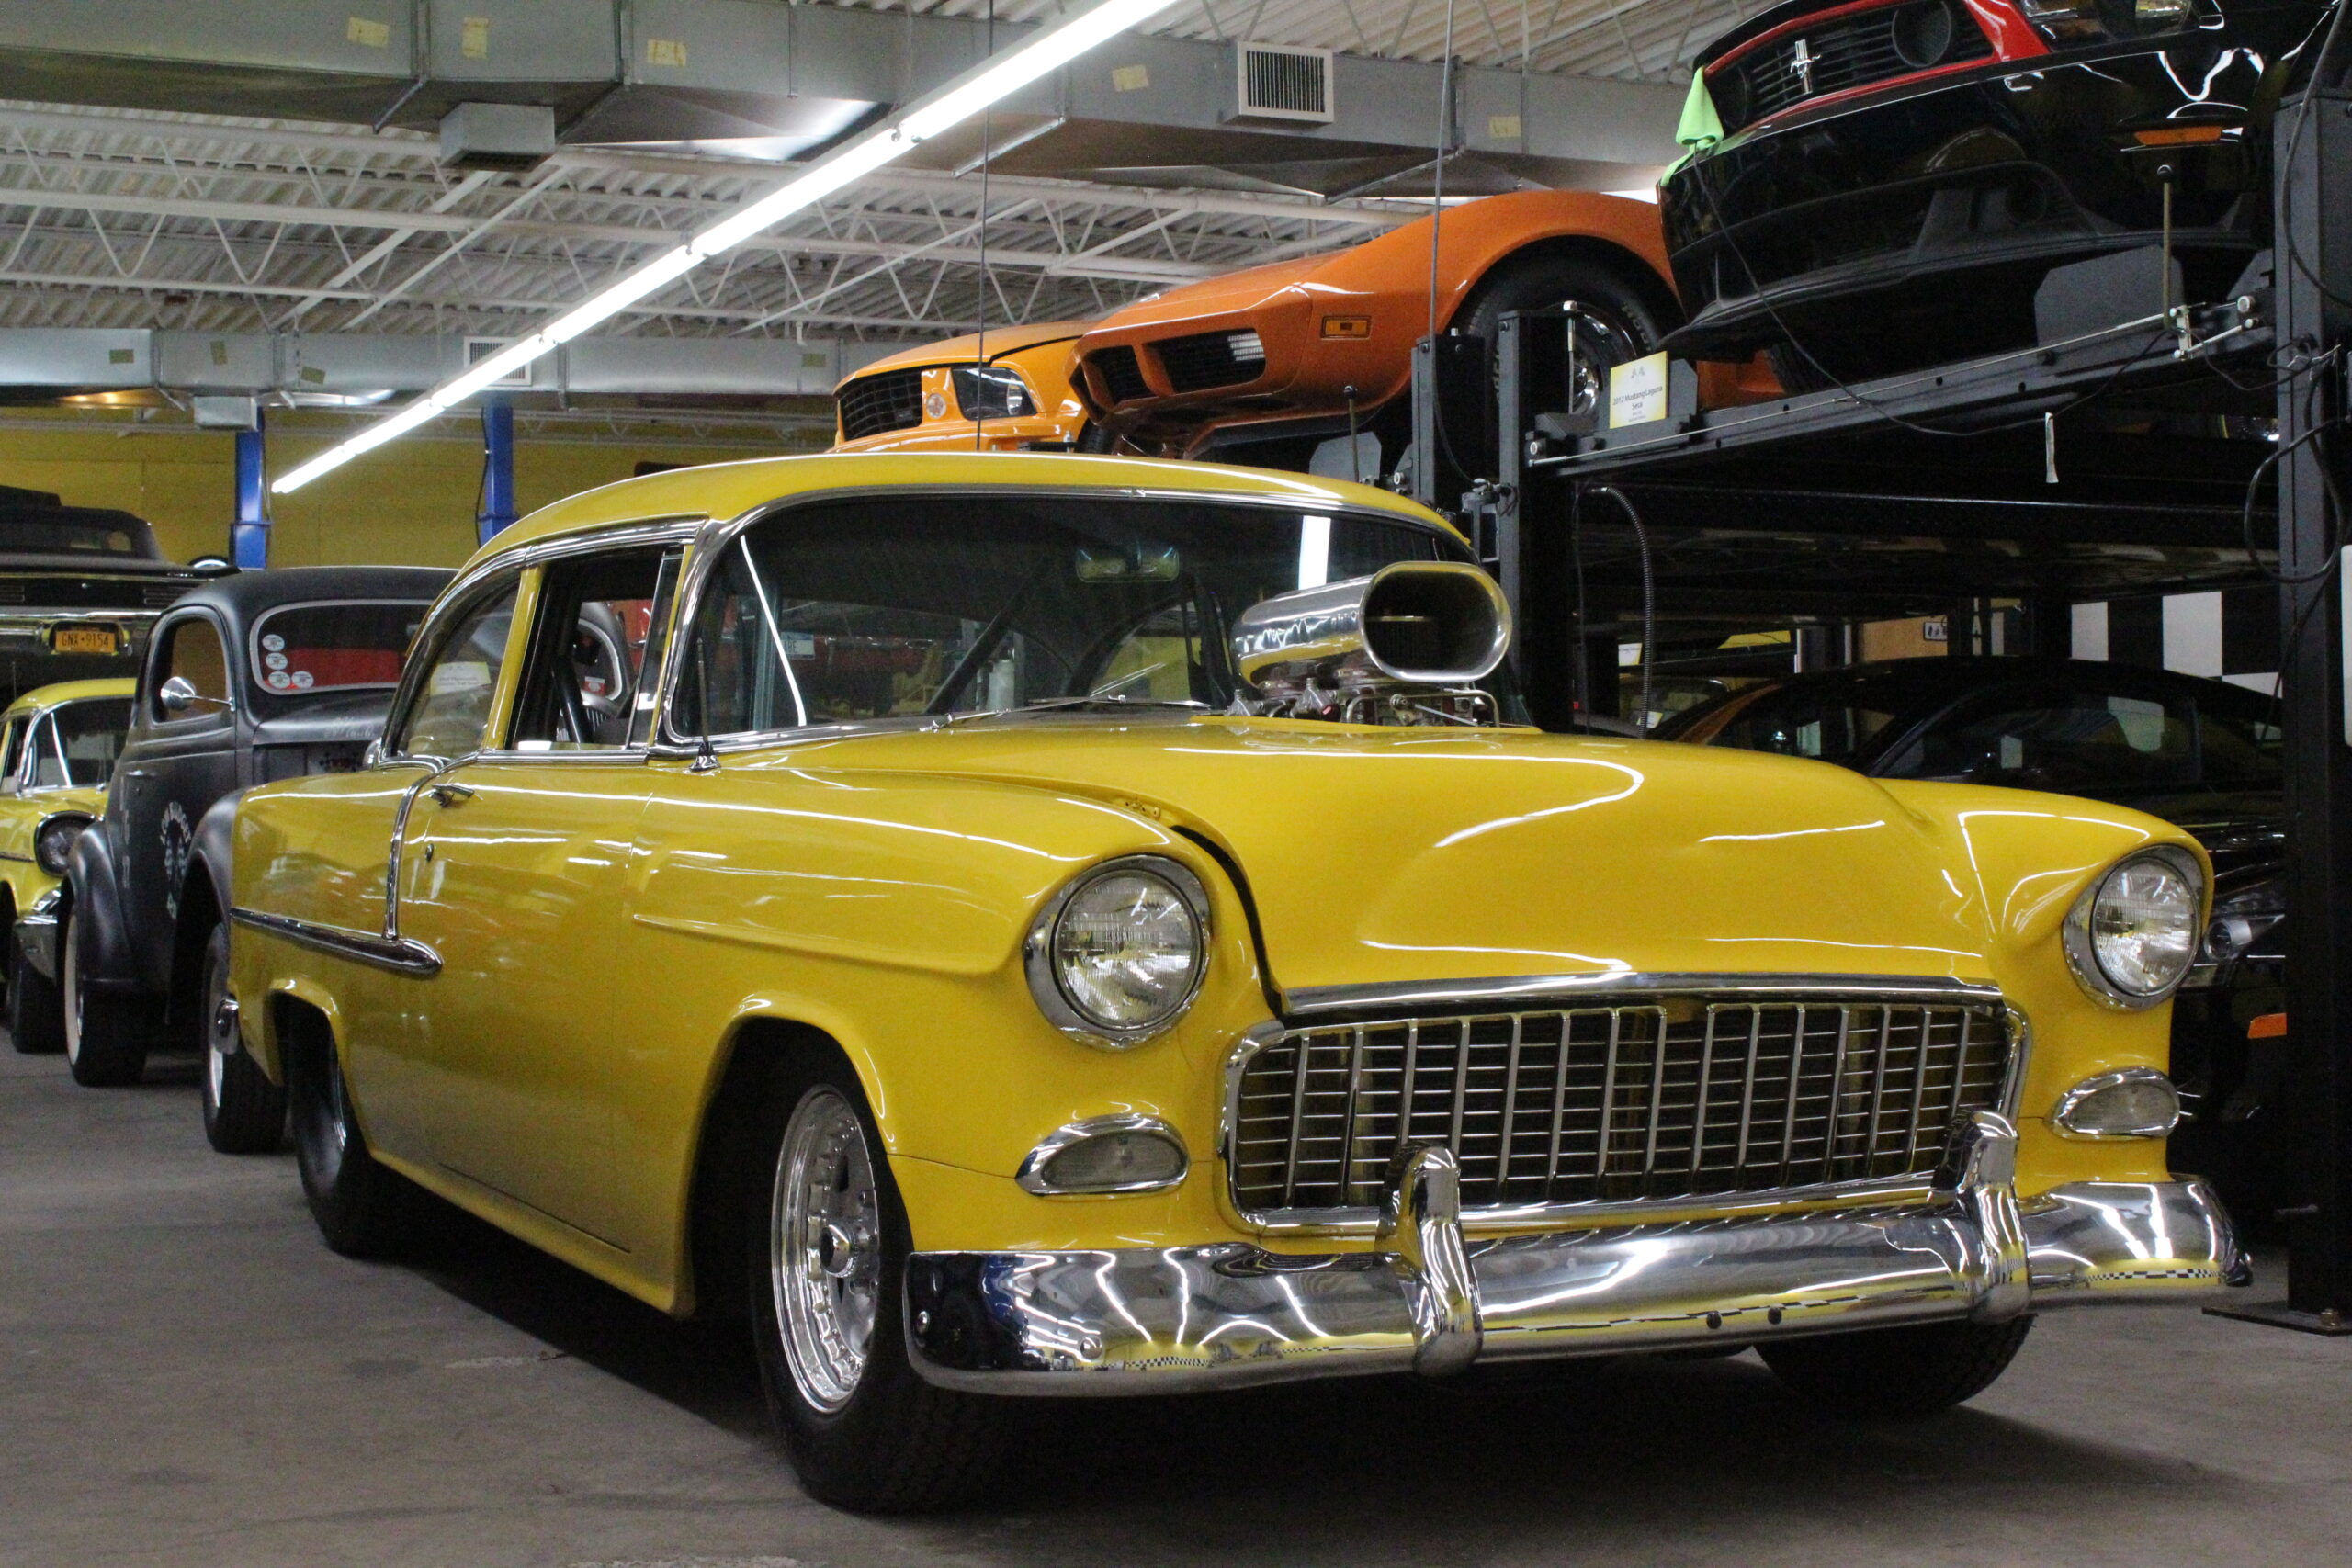 Long Island American Classic and Collectable Cars, Repair and Maintenance